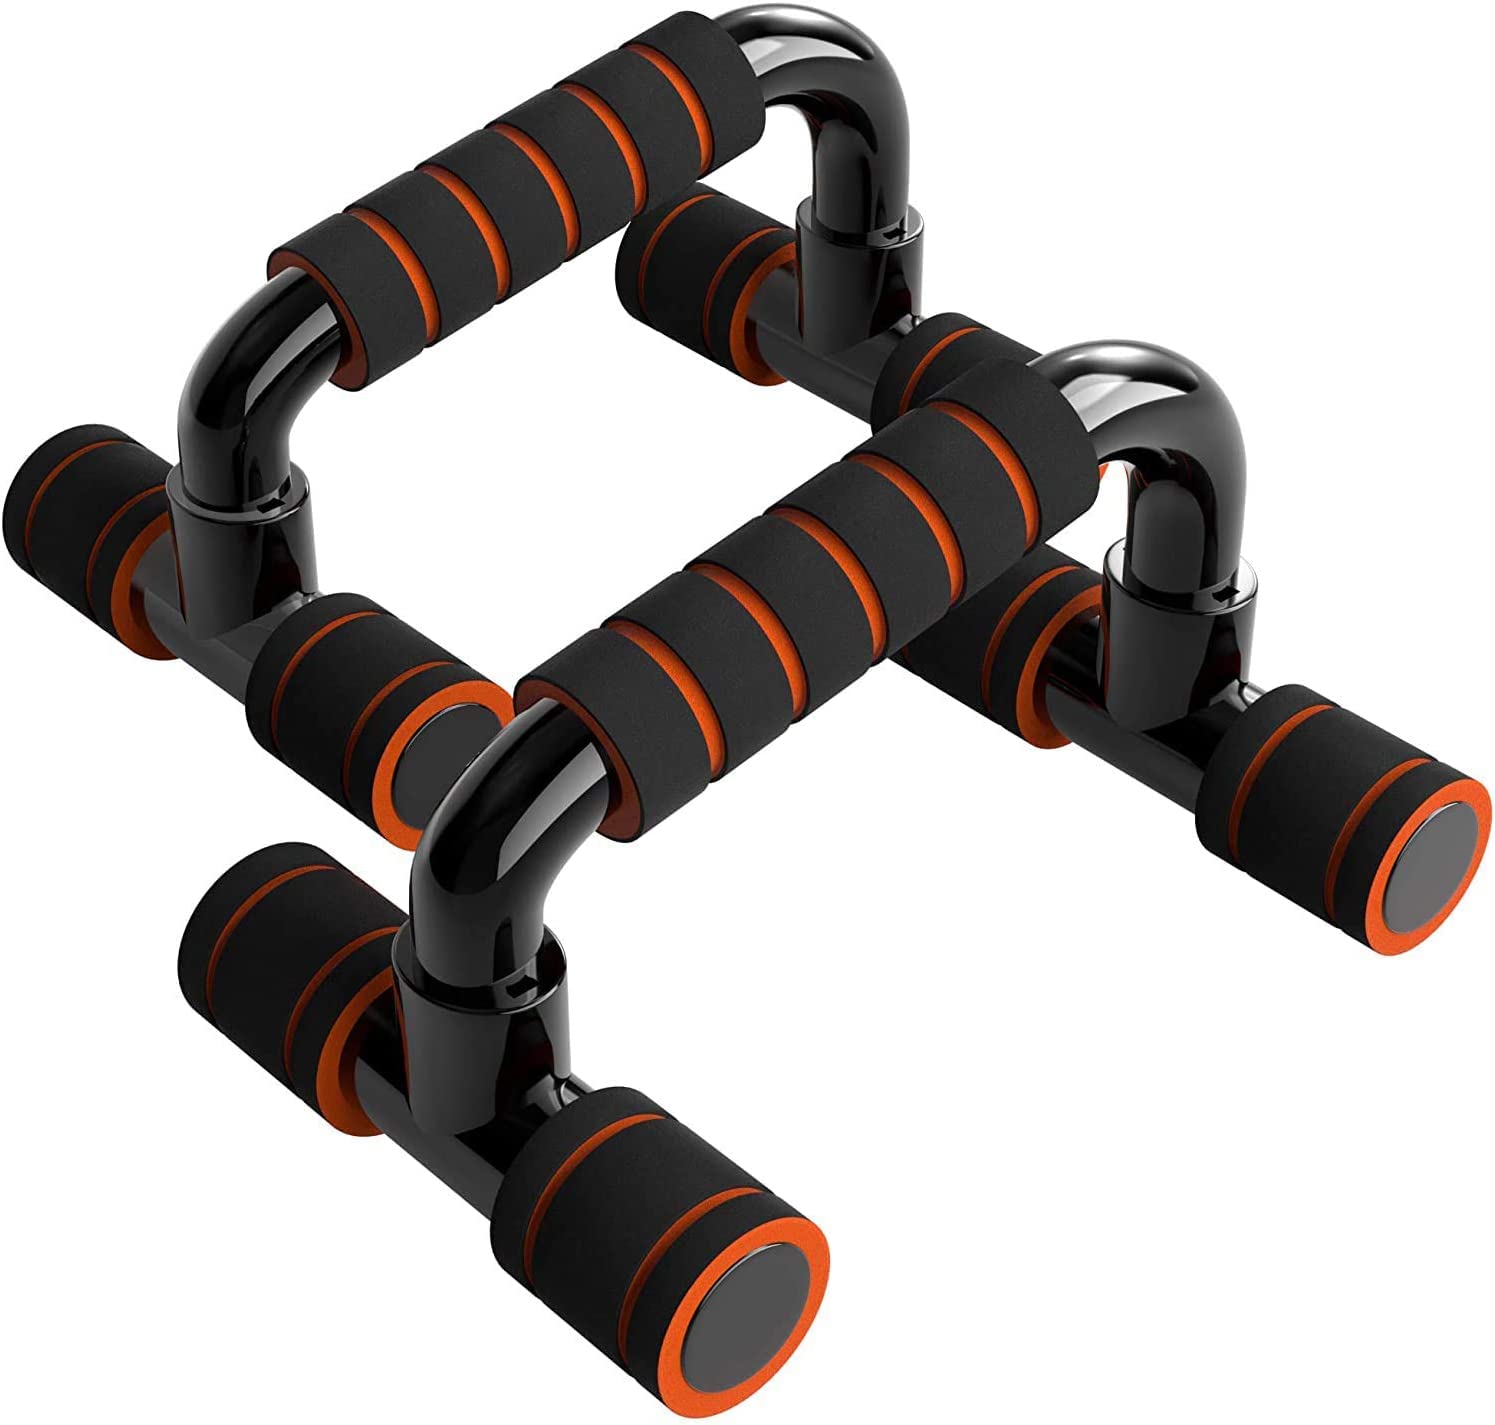 VIO Push Up Bar Stand For Gym & Home Exercise (Assorted Colrs)